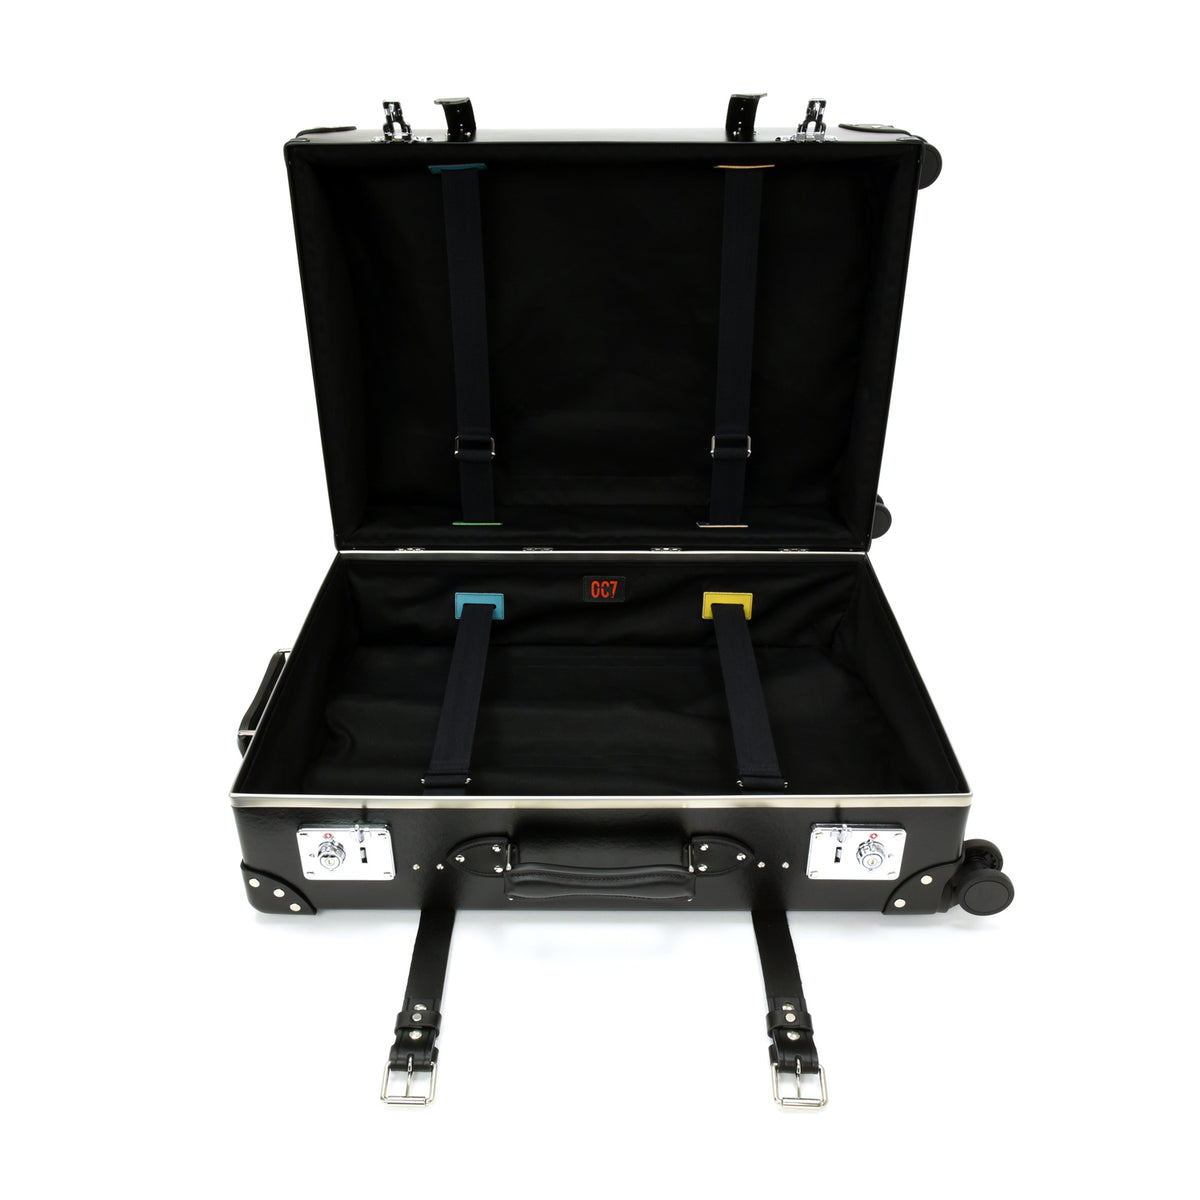 James Bond Check-In Trolley Case - Dr. No Dots Edition - By Globe-Trotter